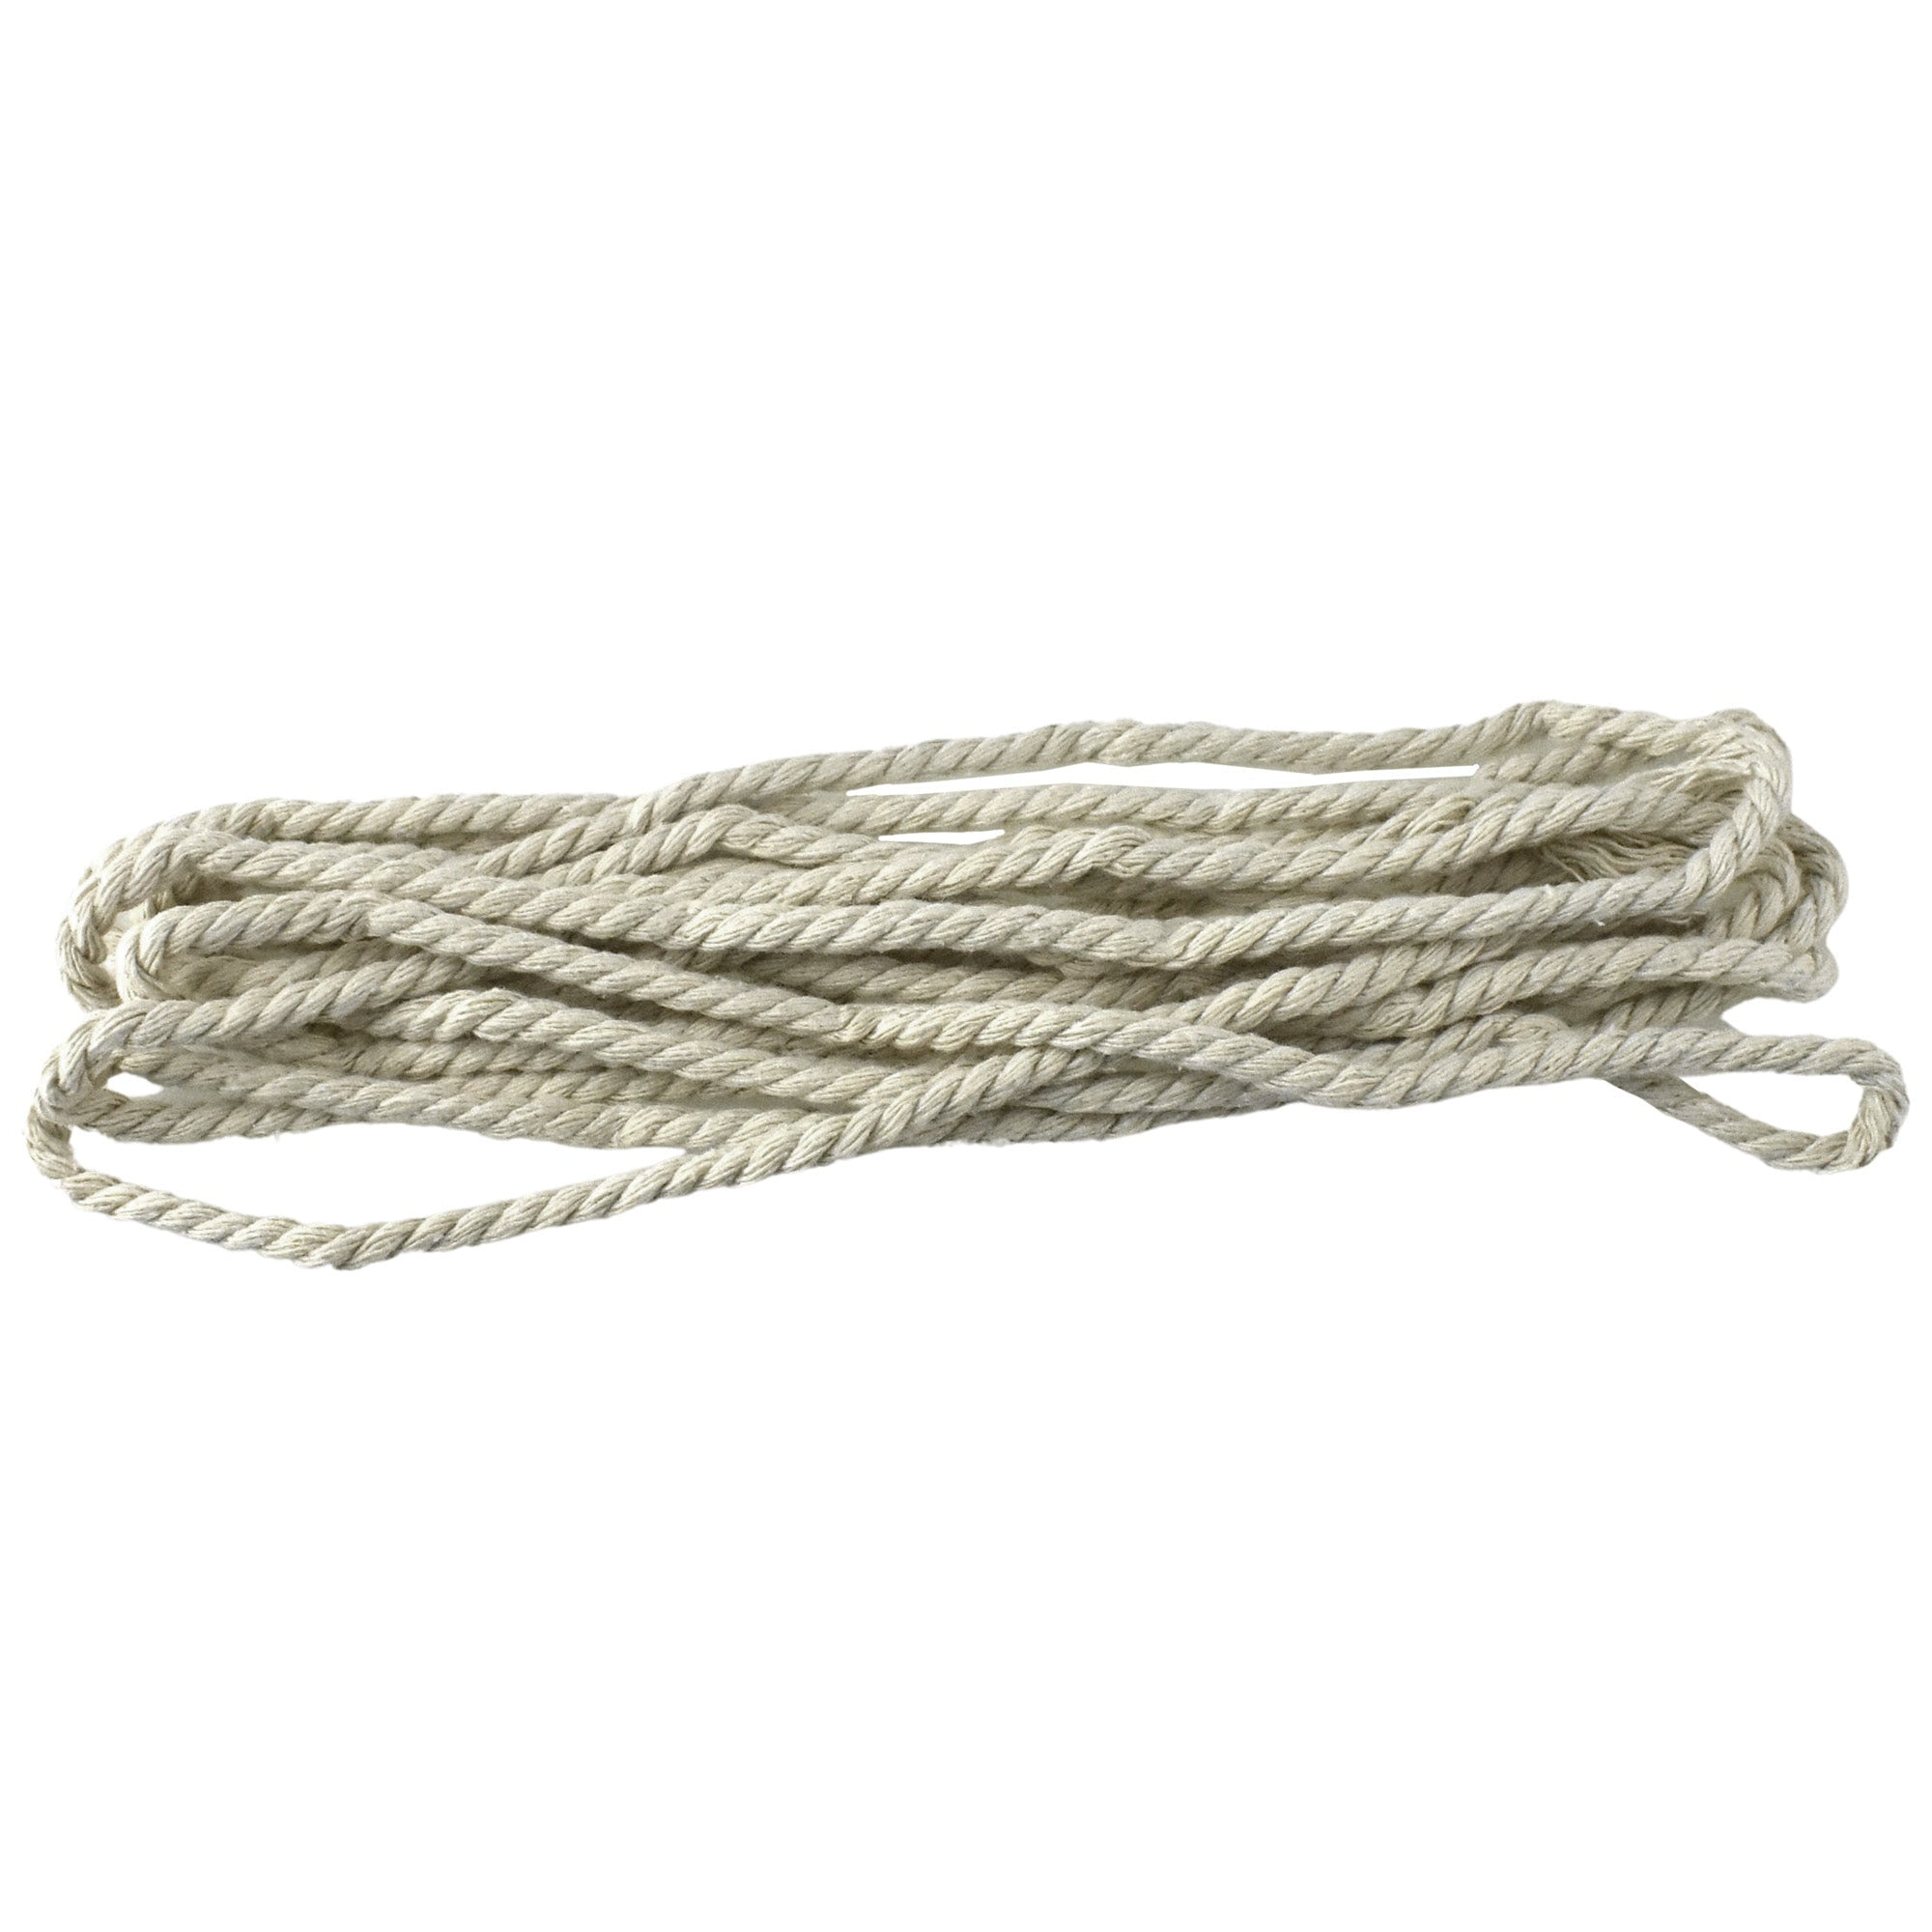 High-Quality Cotton Rope - Strong and Durable Material for Hanging,  Packing, Crafts